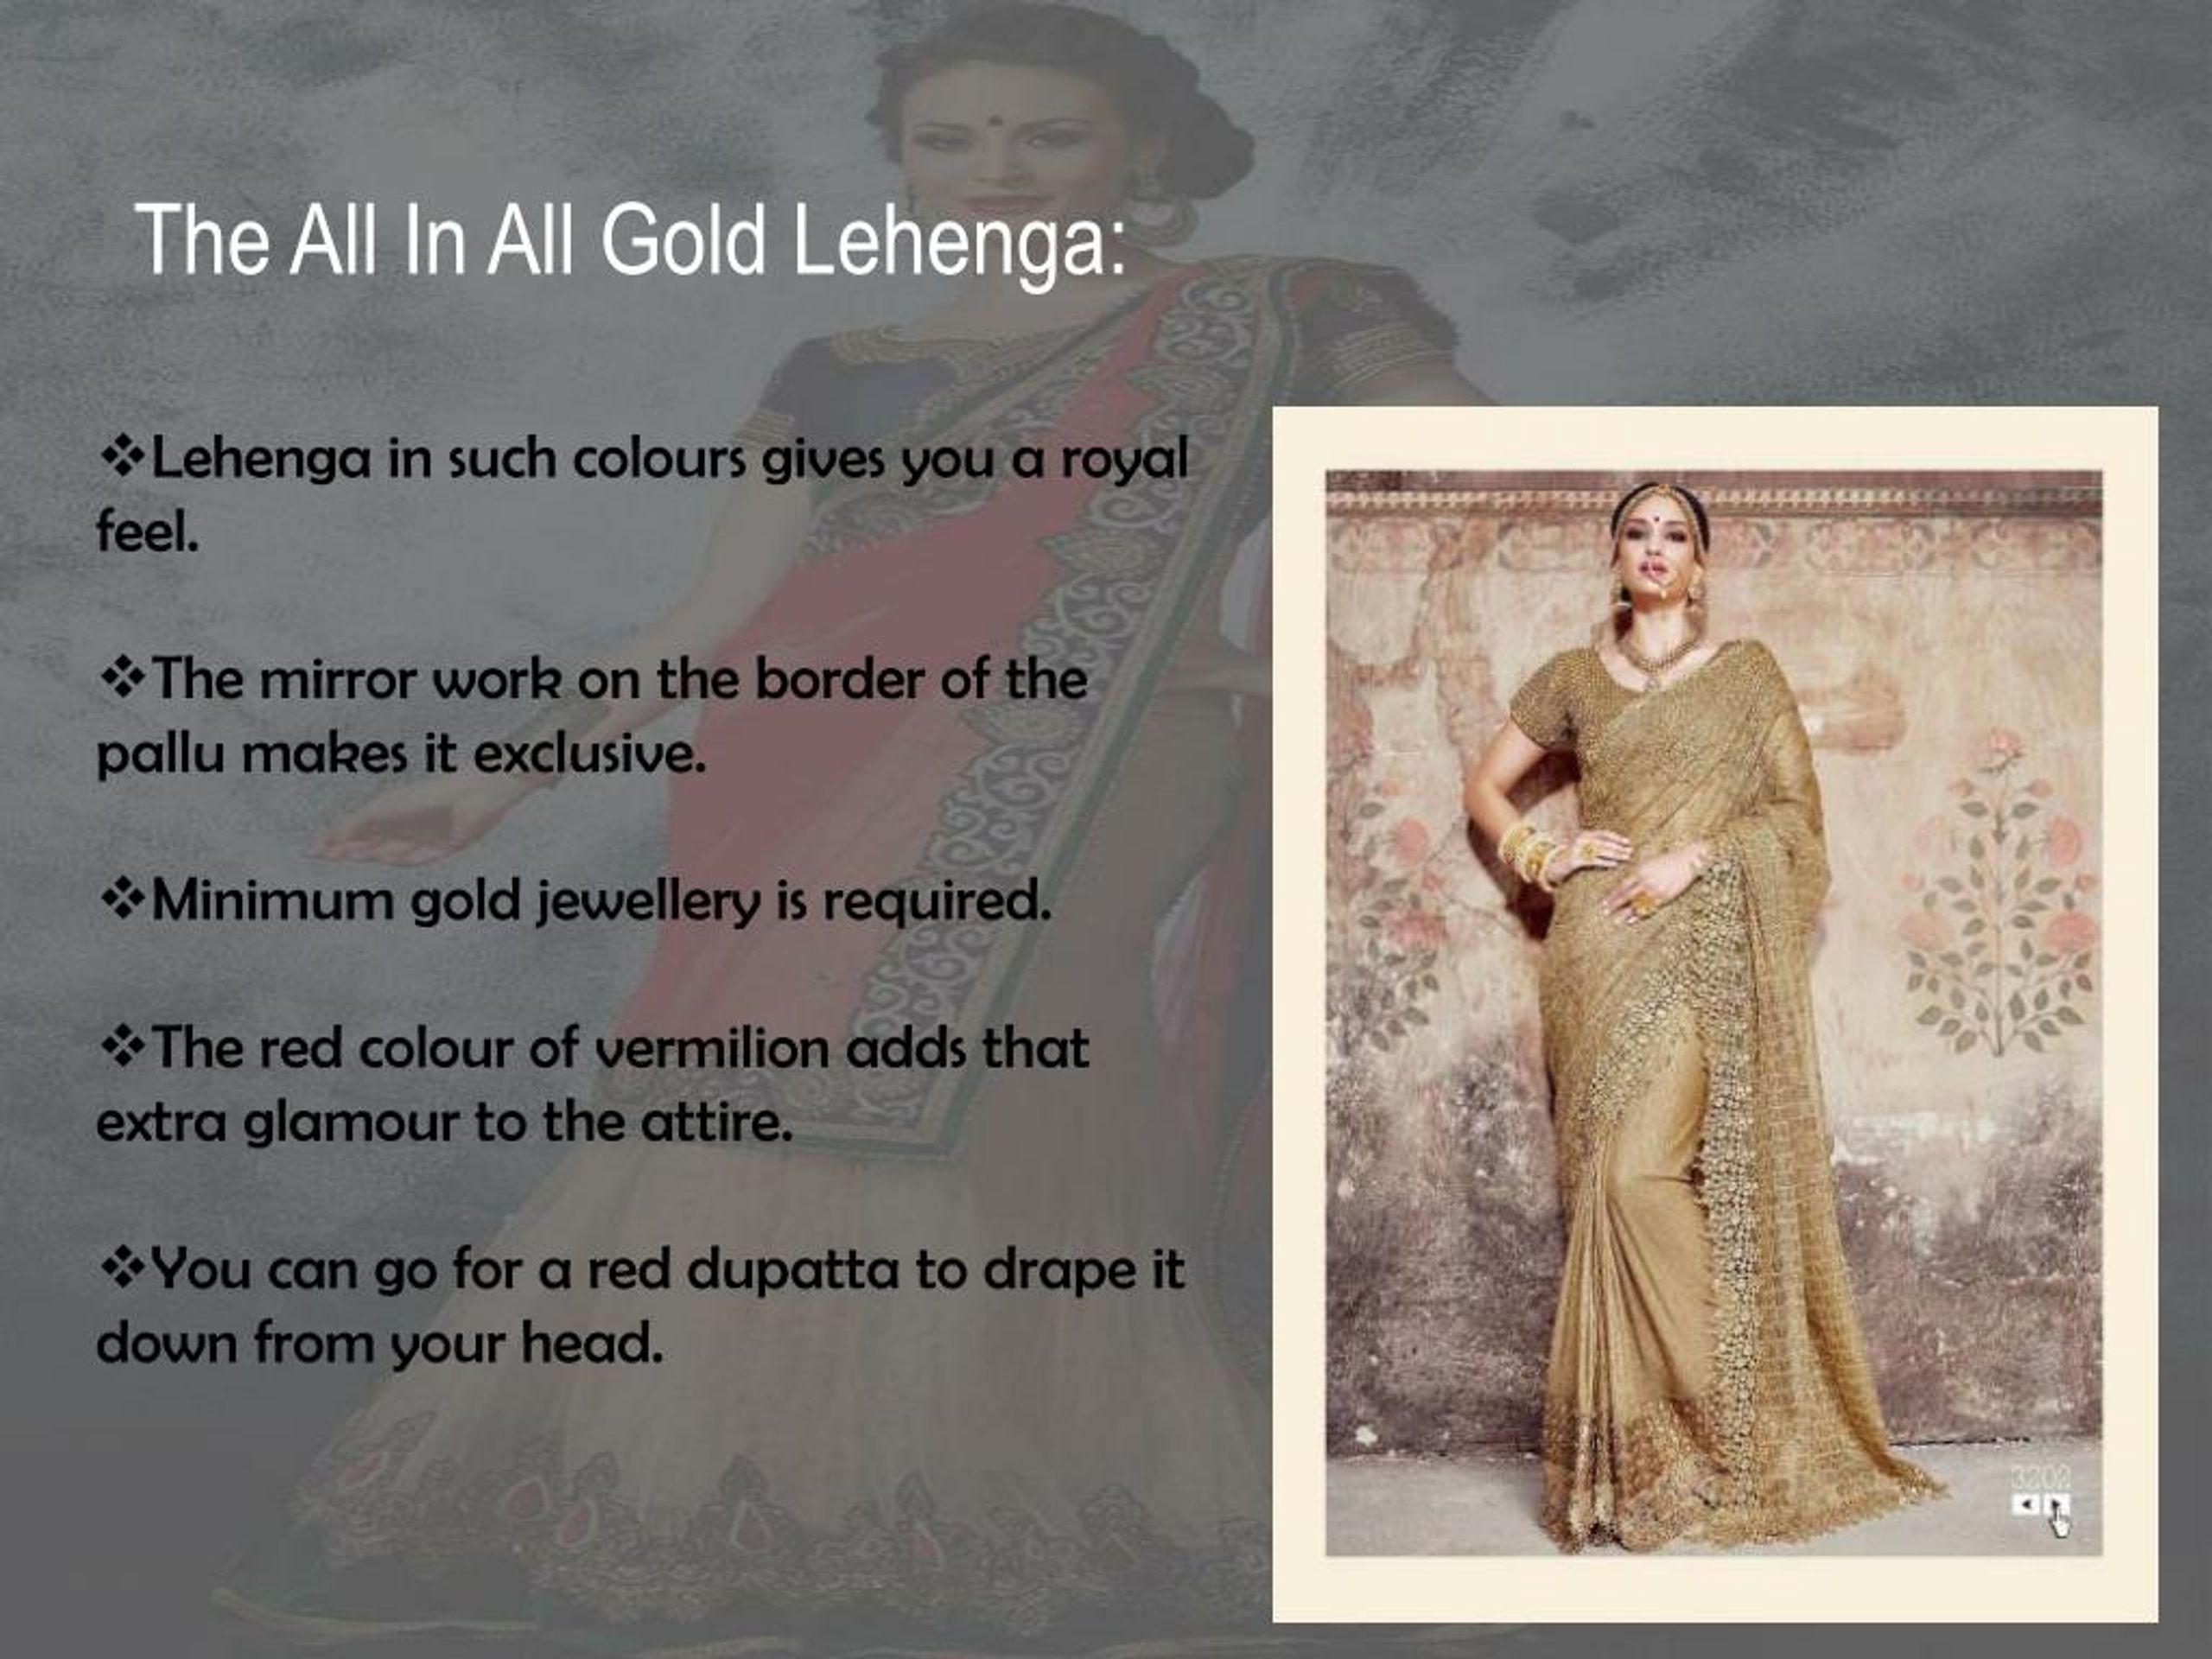 Brush up your style with Indian traditional wear: The Lehenga Choli